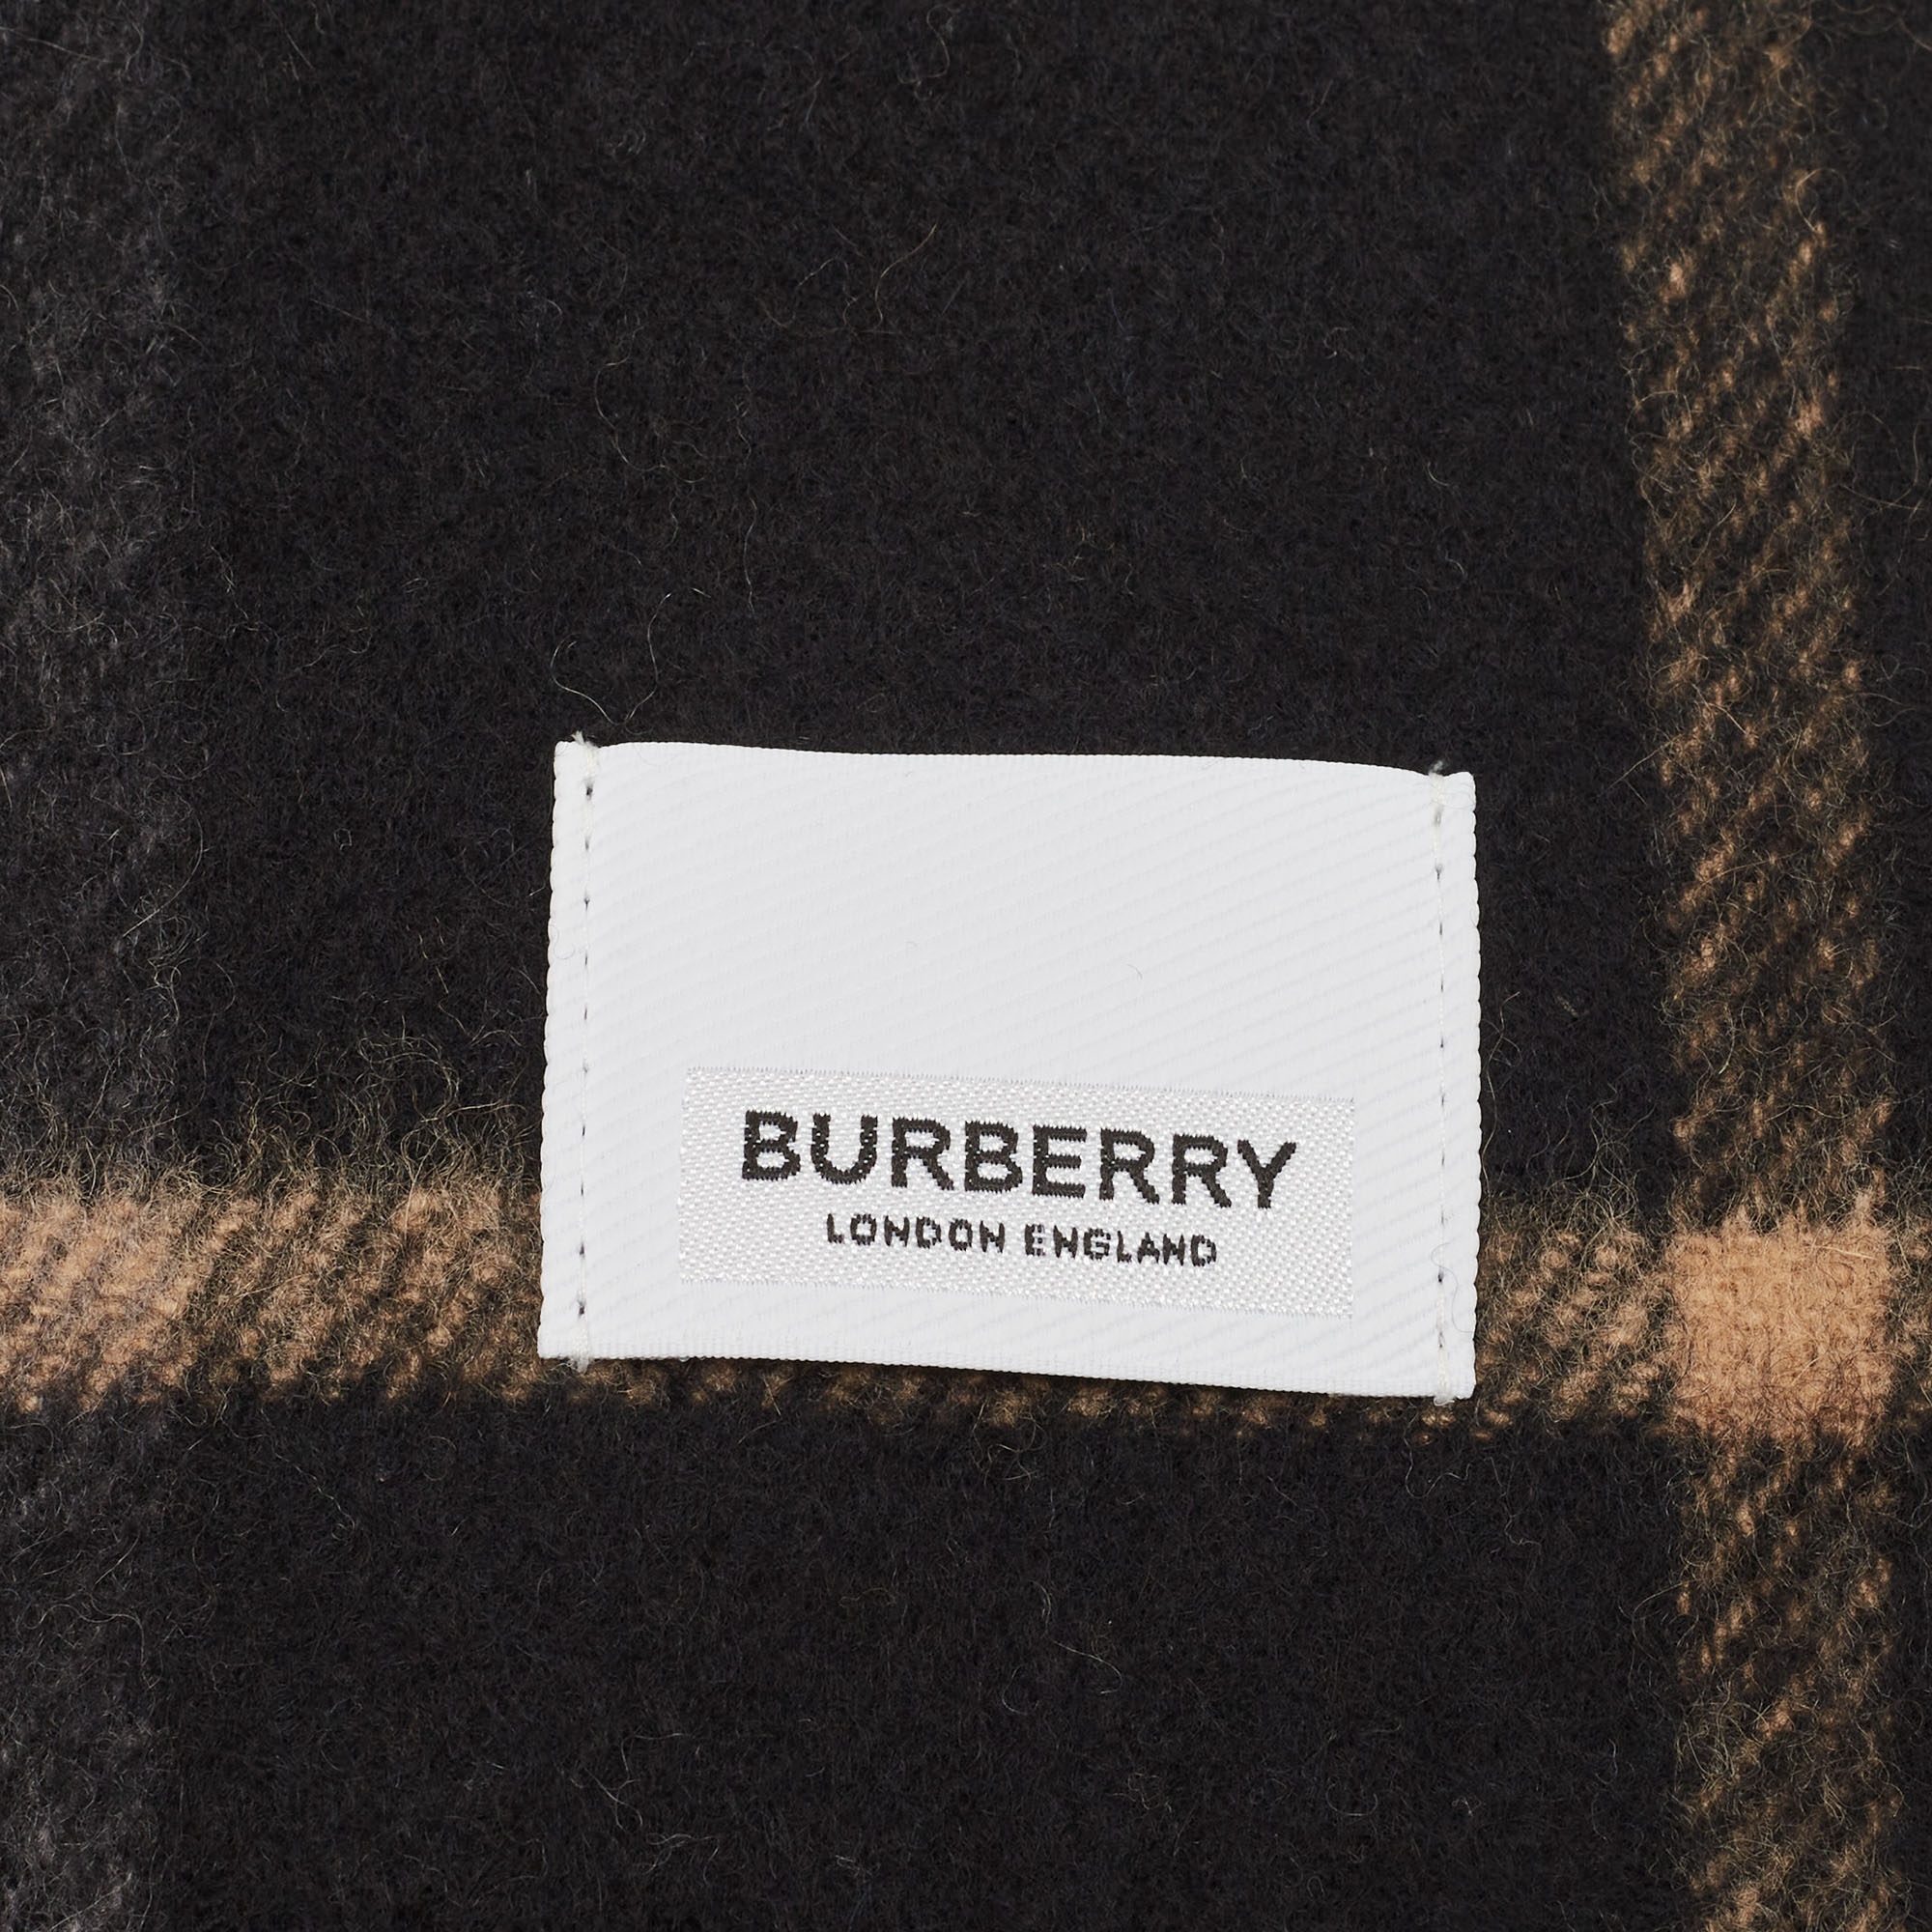 Burberry Black Saddle Stripe To Check Cashmere Fringed Scarf